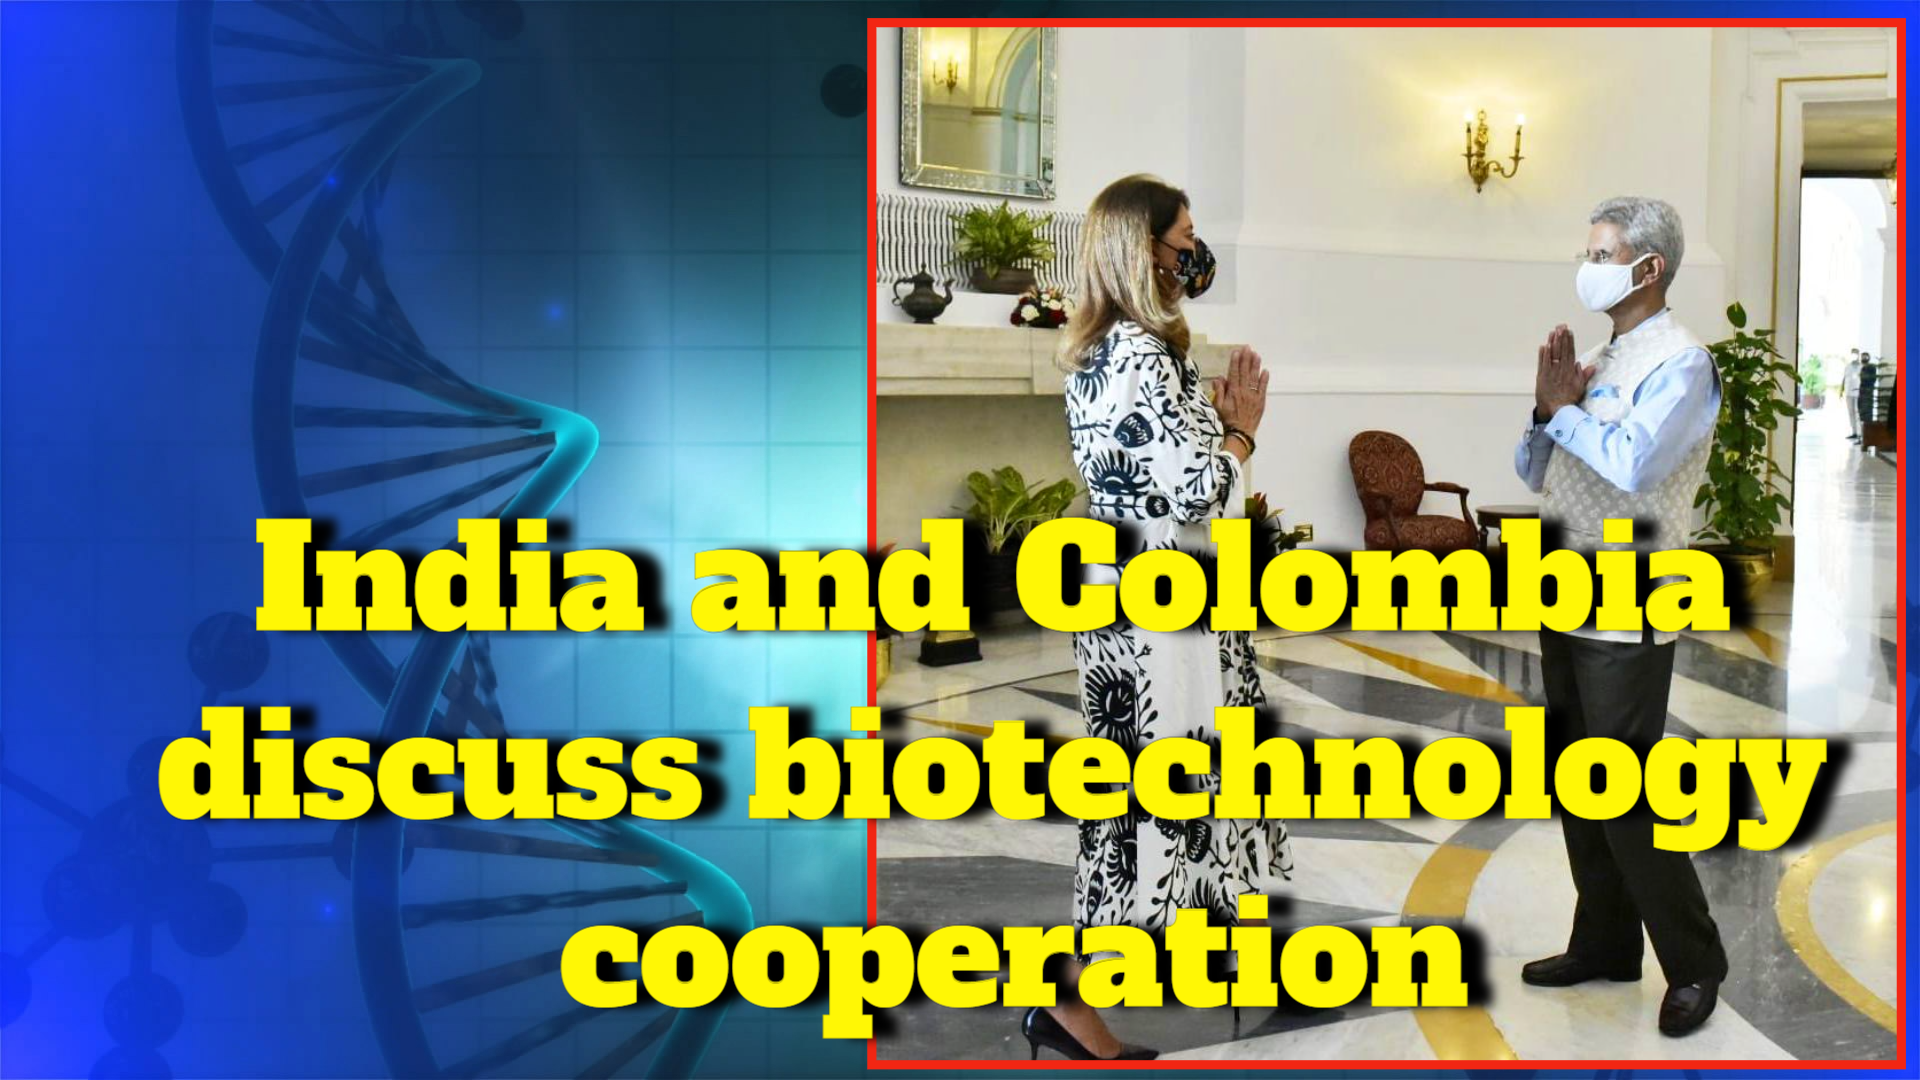 Exchange of views on biotechnology cooperation between India and Colombia